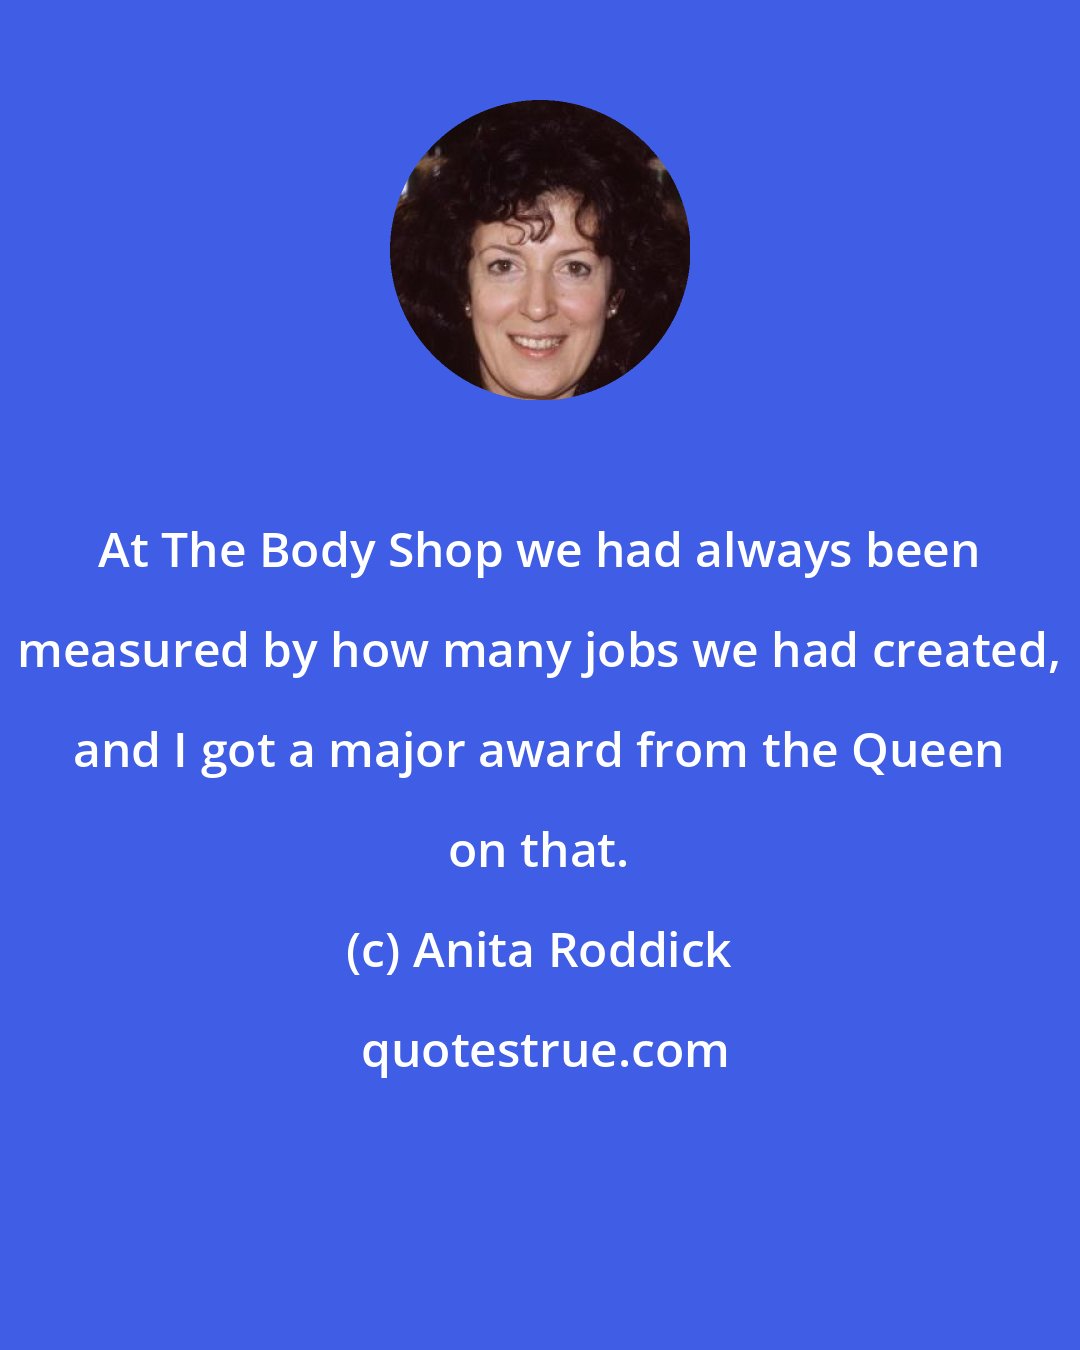 Anita Roddick: At The Body Shop we had always been measured by how many jobs we had created, and I got a major award from the Queen on that.